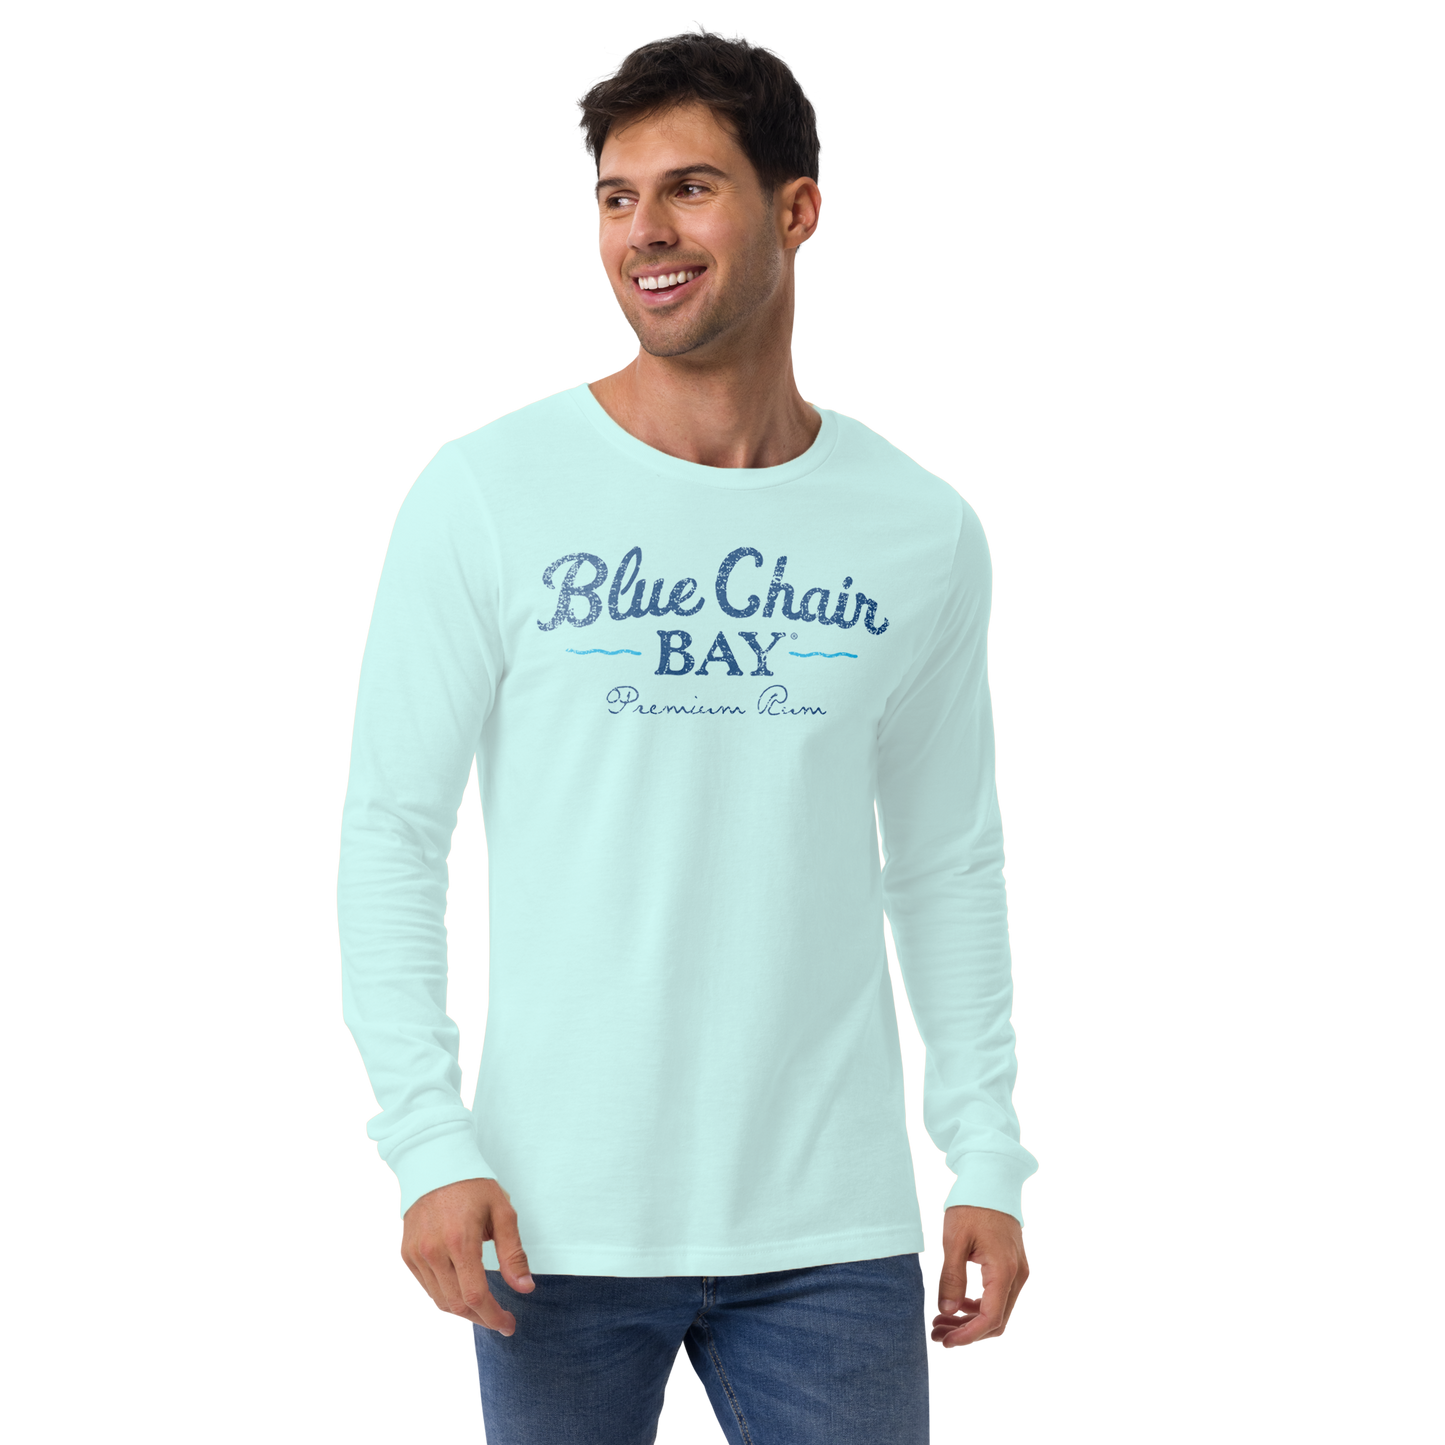 The Men's Long Sleeve Tee XAS201 Seafoam, is made of 100% recycled  polyester, UPF 50, and has XTRATUF logos on front and back.